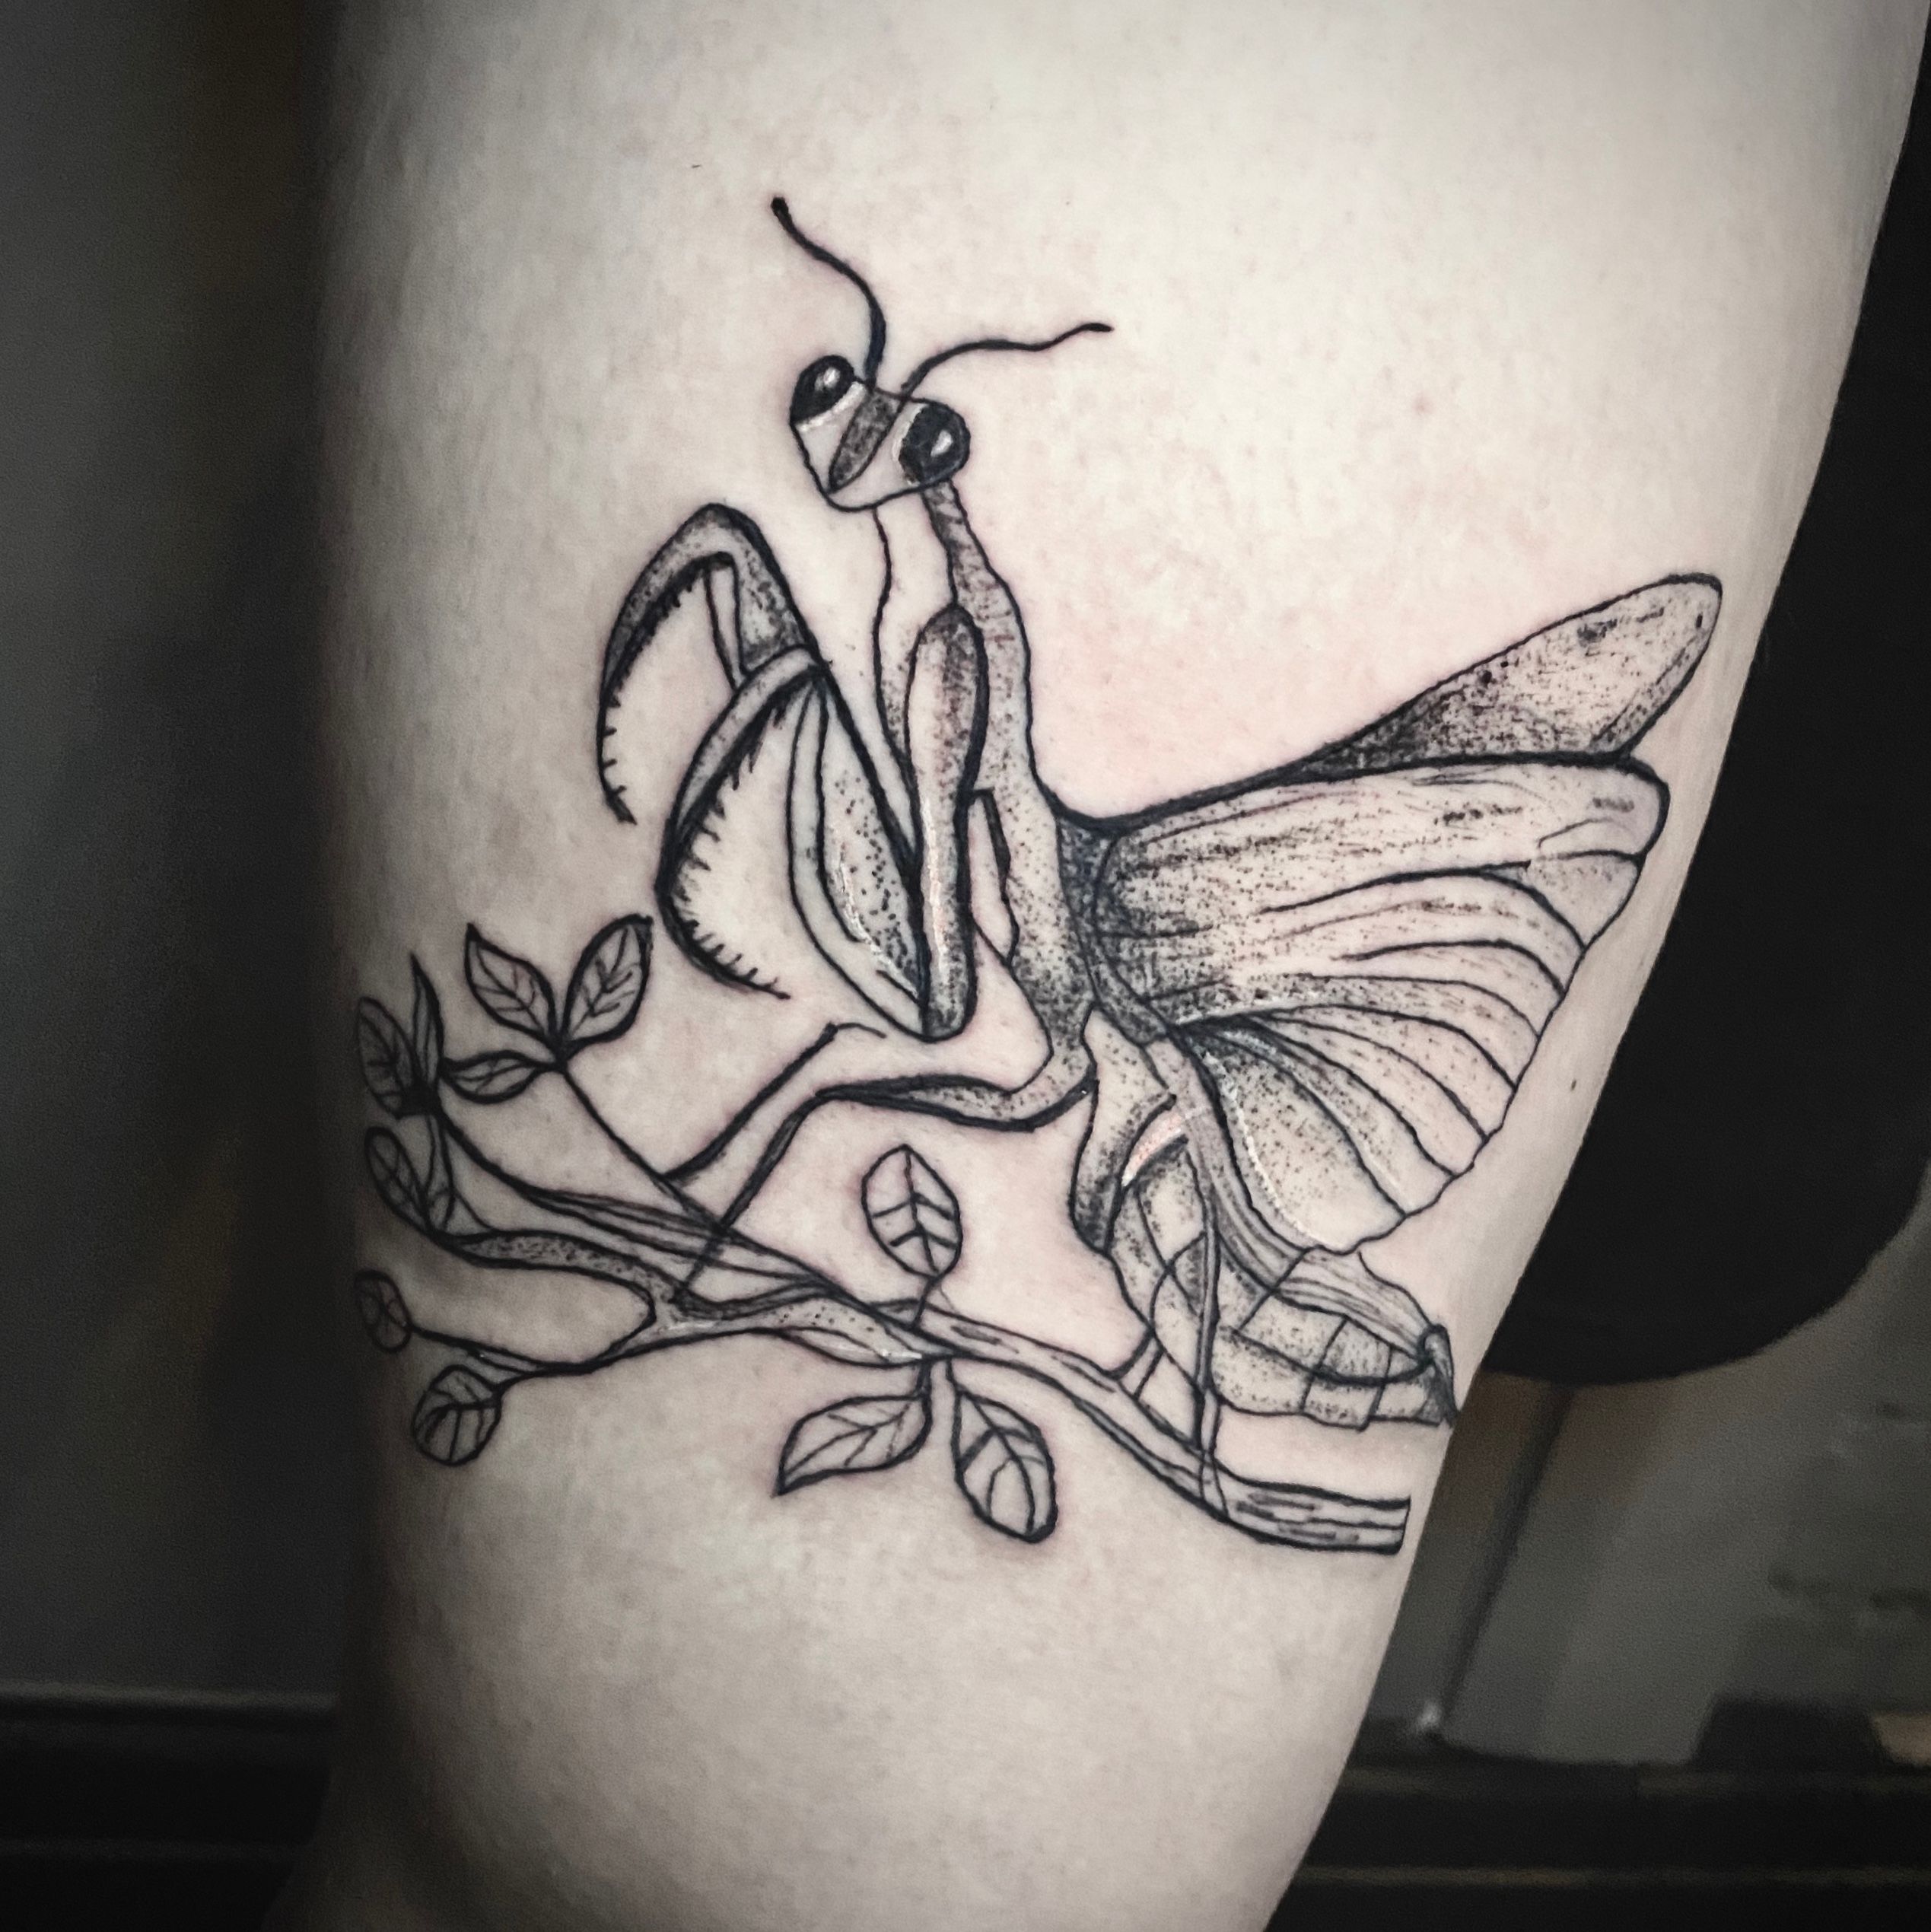 Meaning of your tattooPraying Mantis Mental peace  love of nature   Steemit